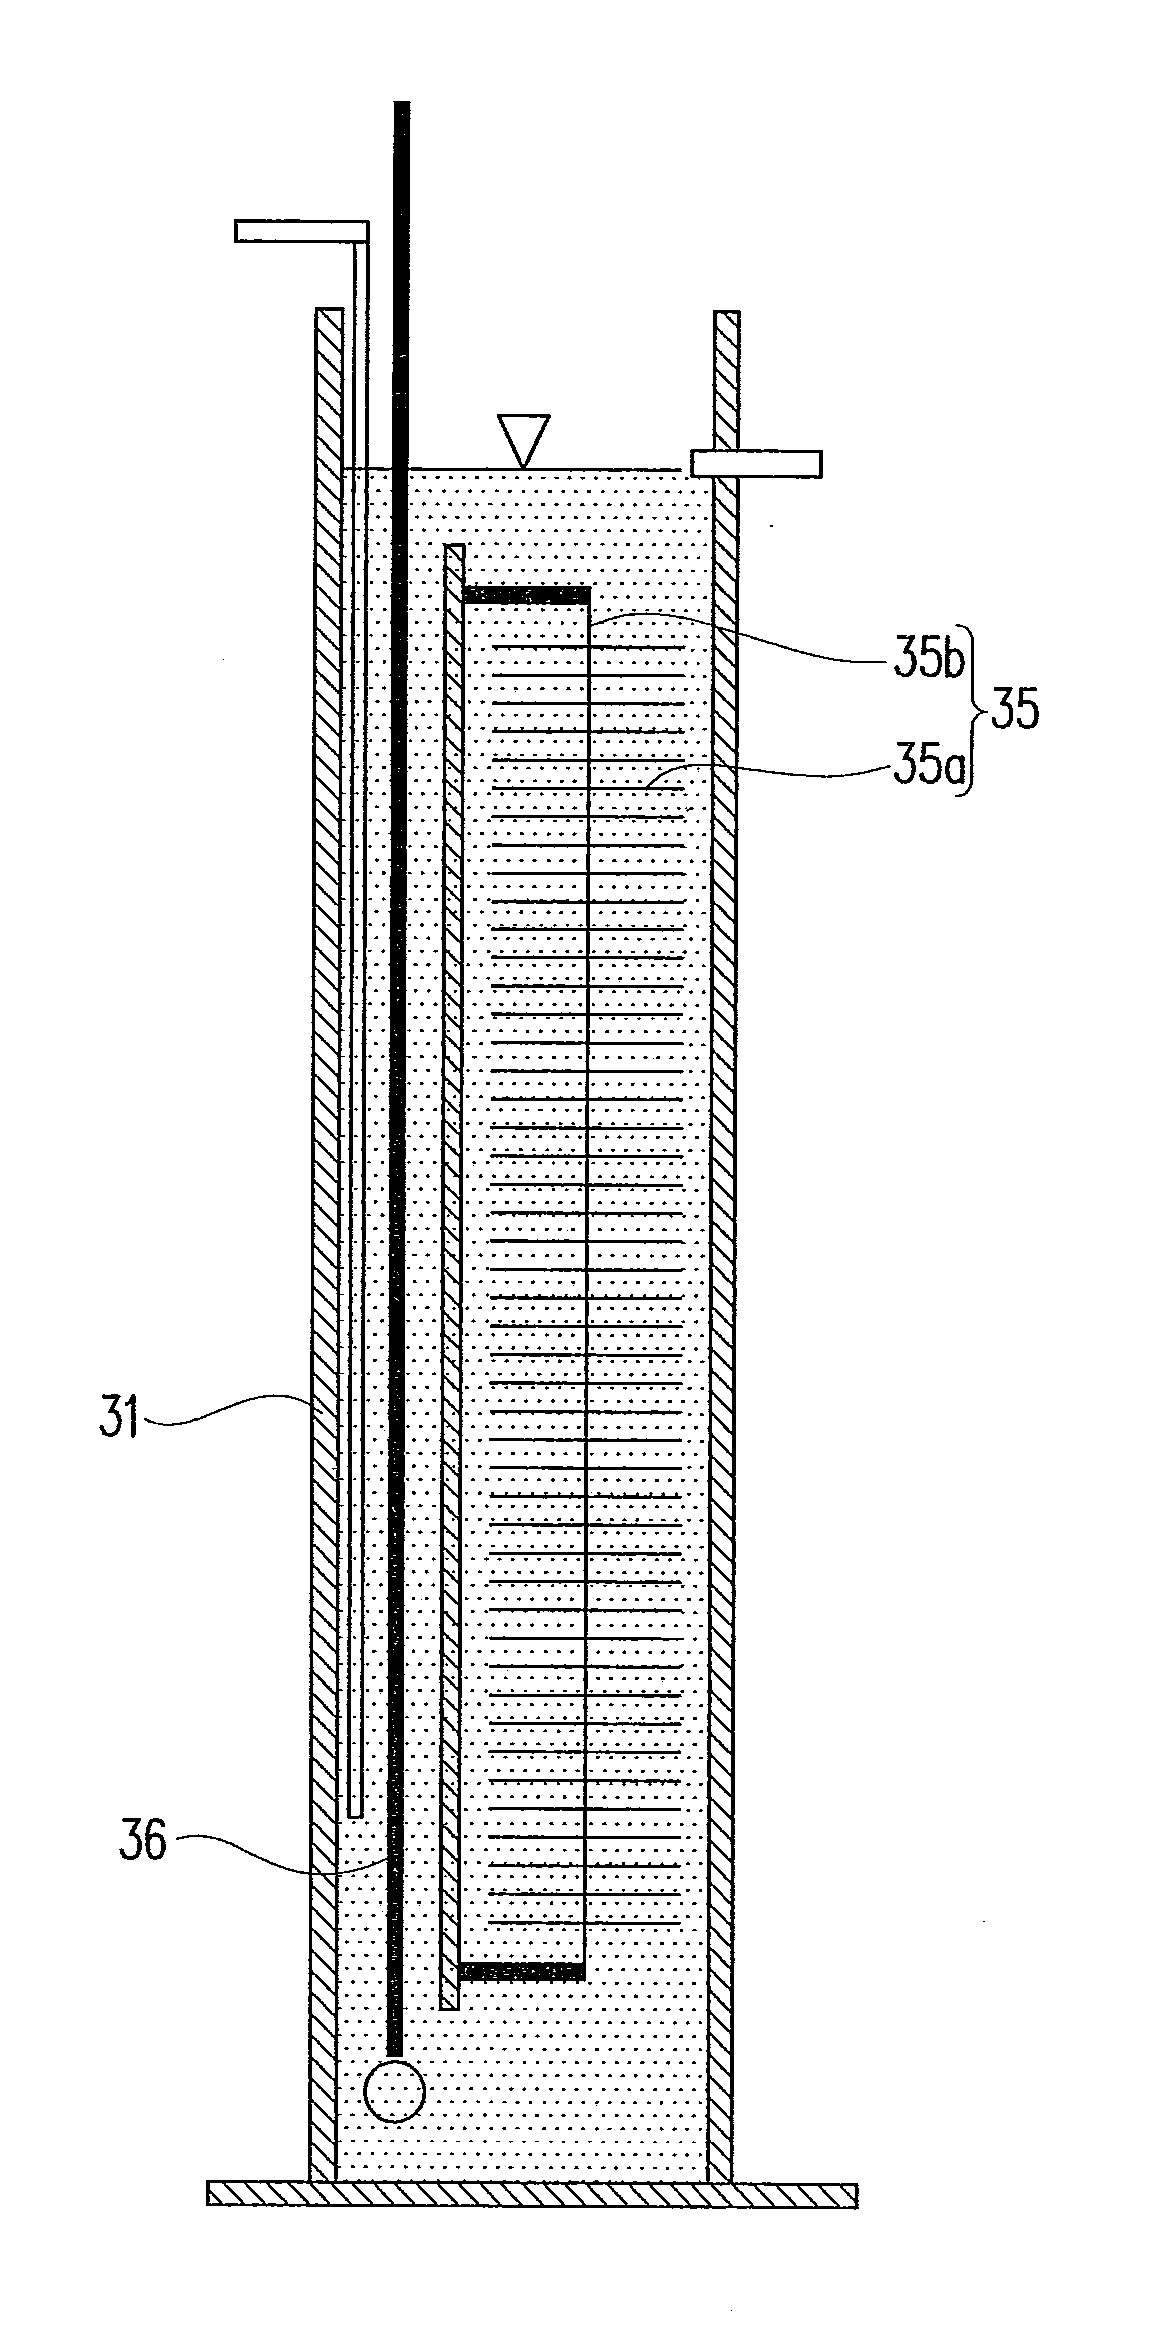 Method and Apparatus for Generating Fresh Water, and Method and Apparatus for Desalinating Sea Water